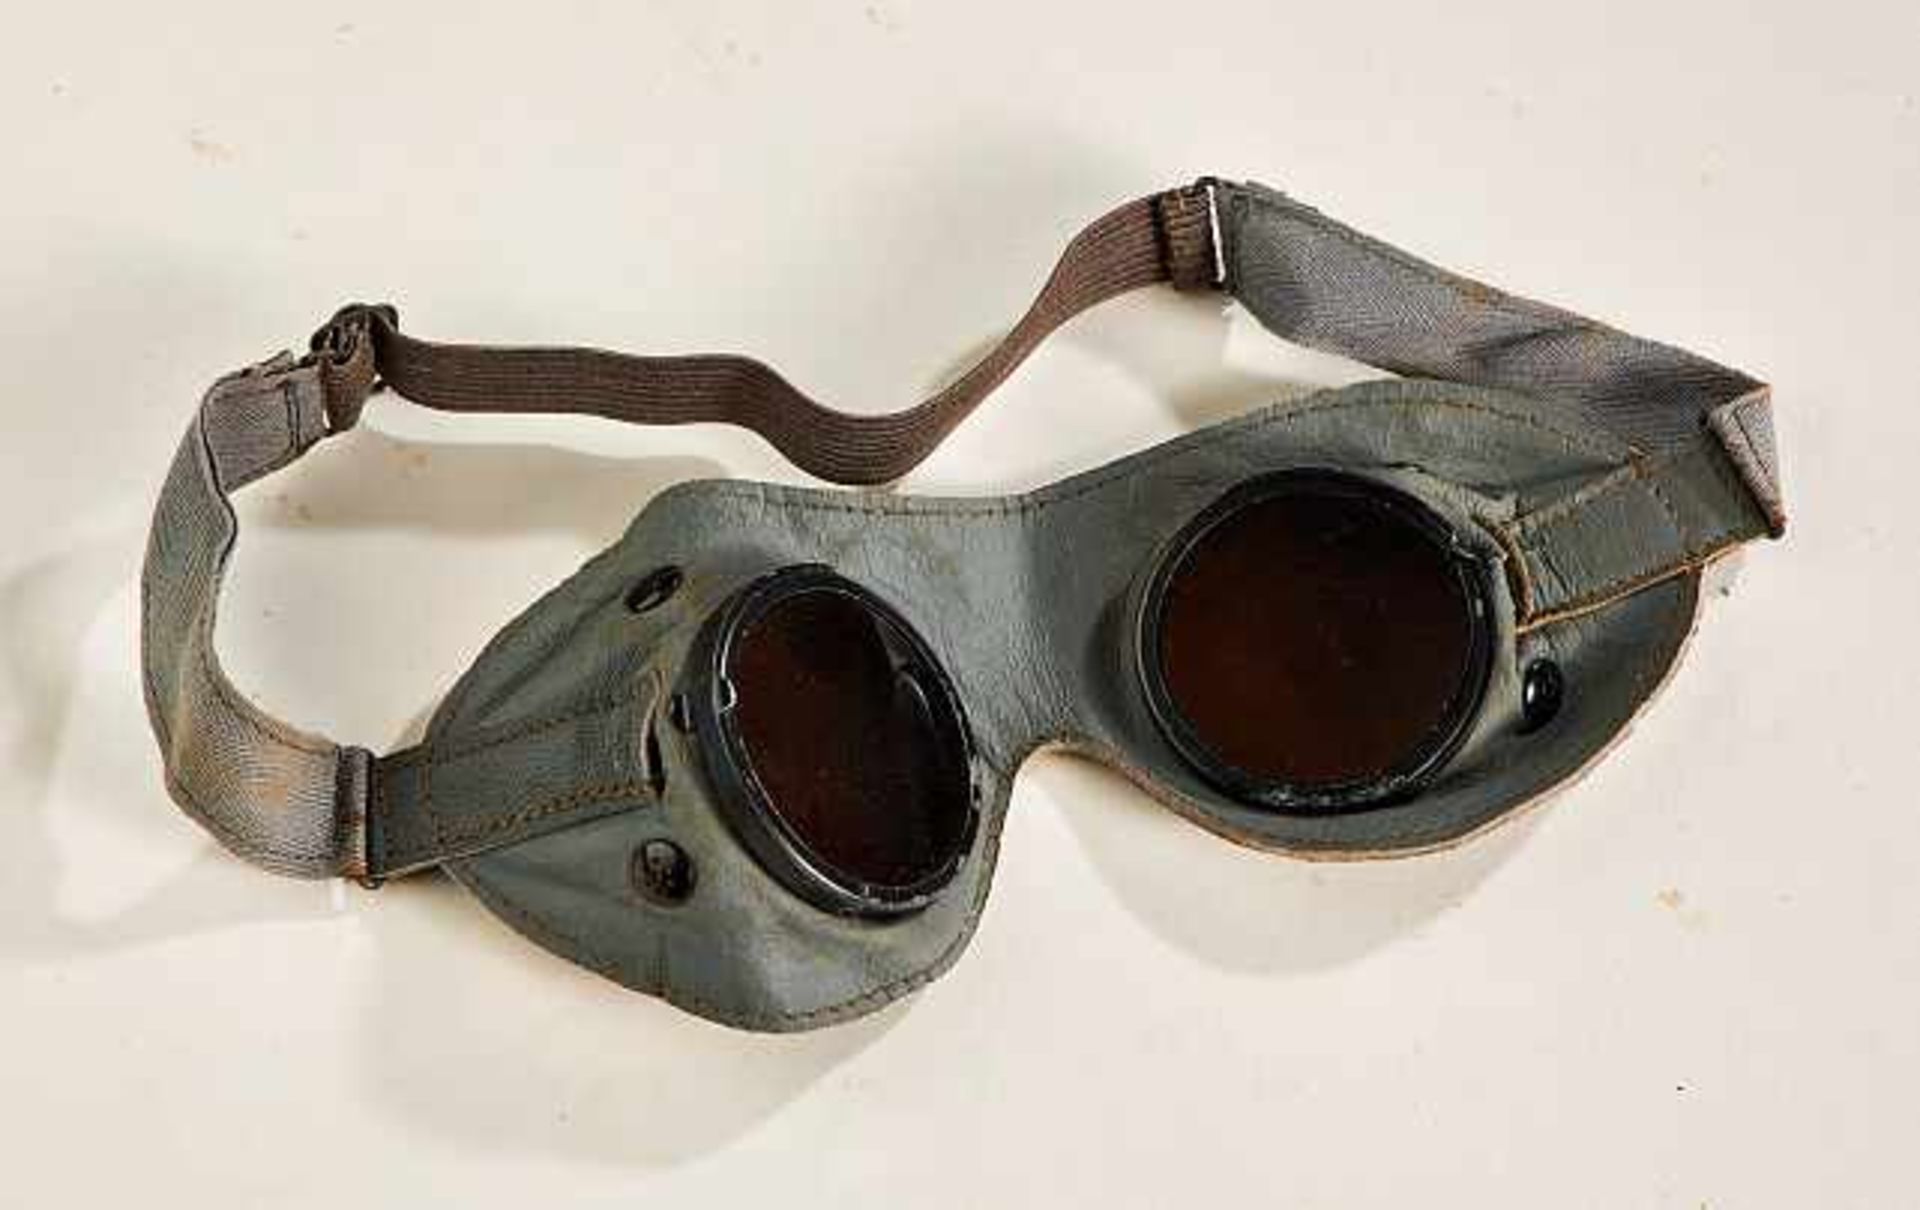 Deutsches Reich 1933 - 1945 - Heer : Army Issue Sun, wind and dust goggles.Tinted goggles come